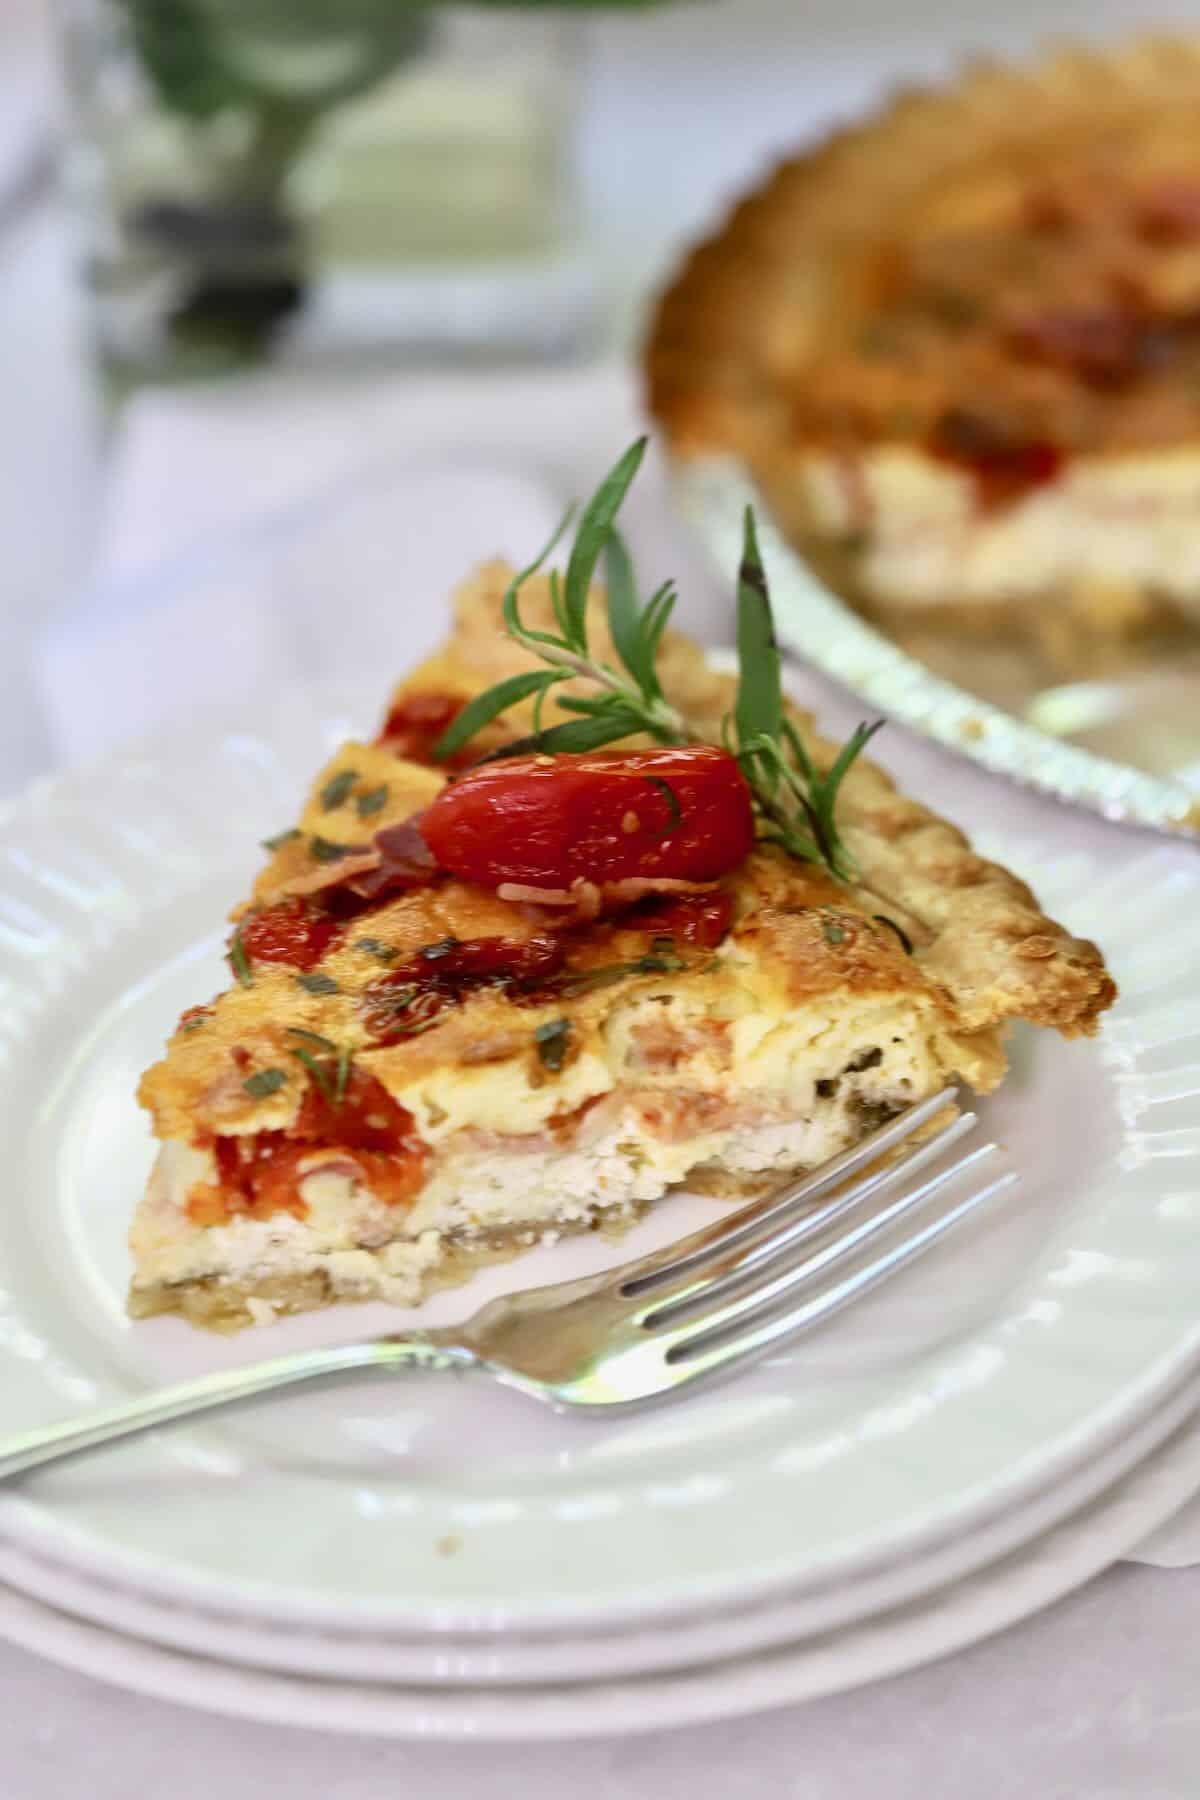 A slice of quiche topped with roasted tomatoes and fresh rosemary.